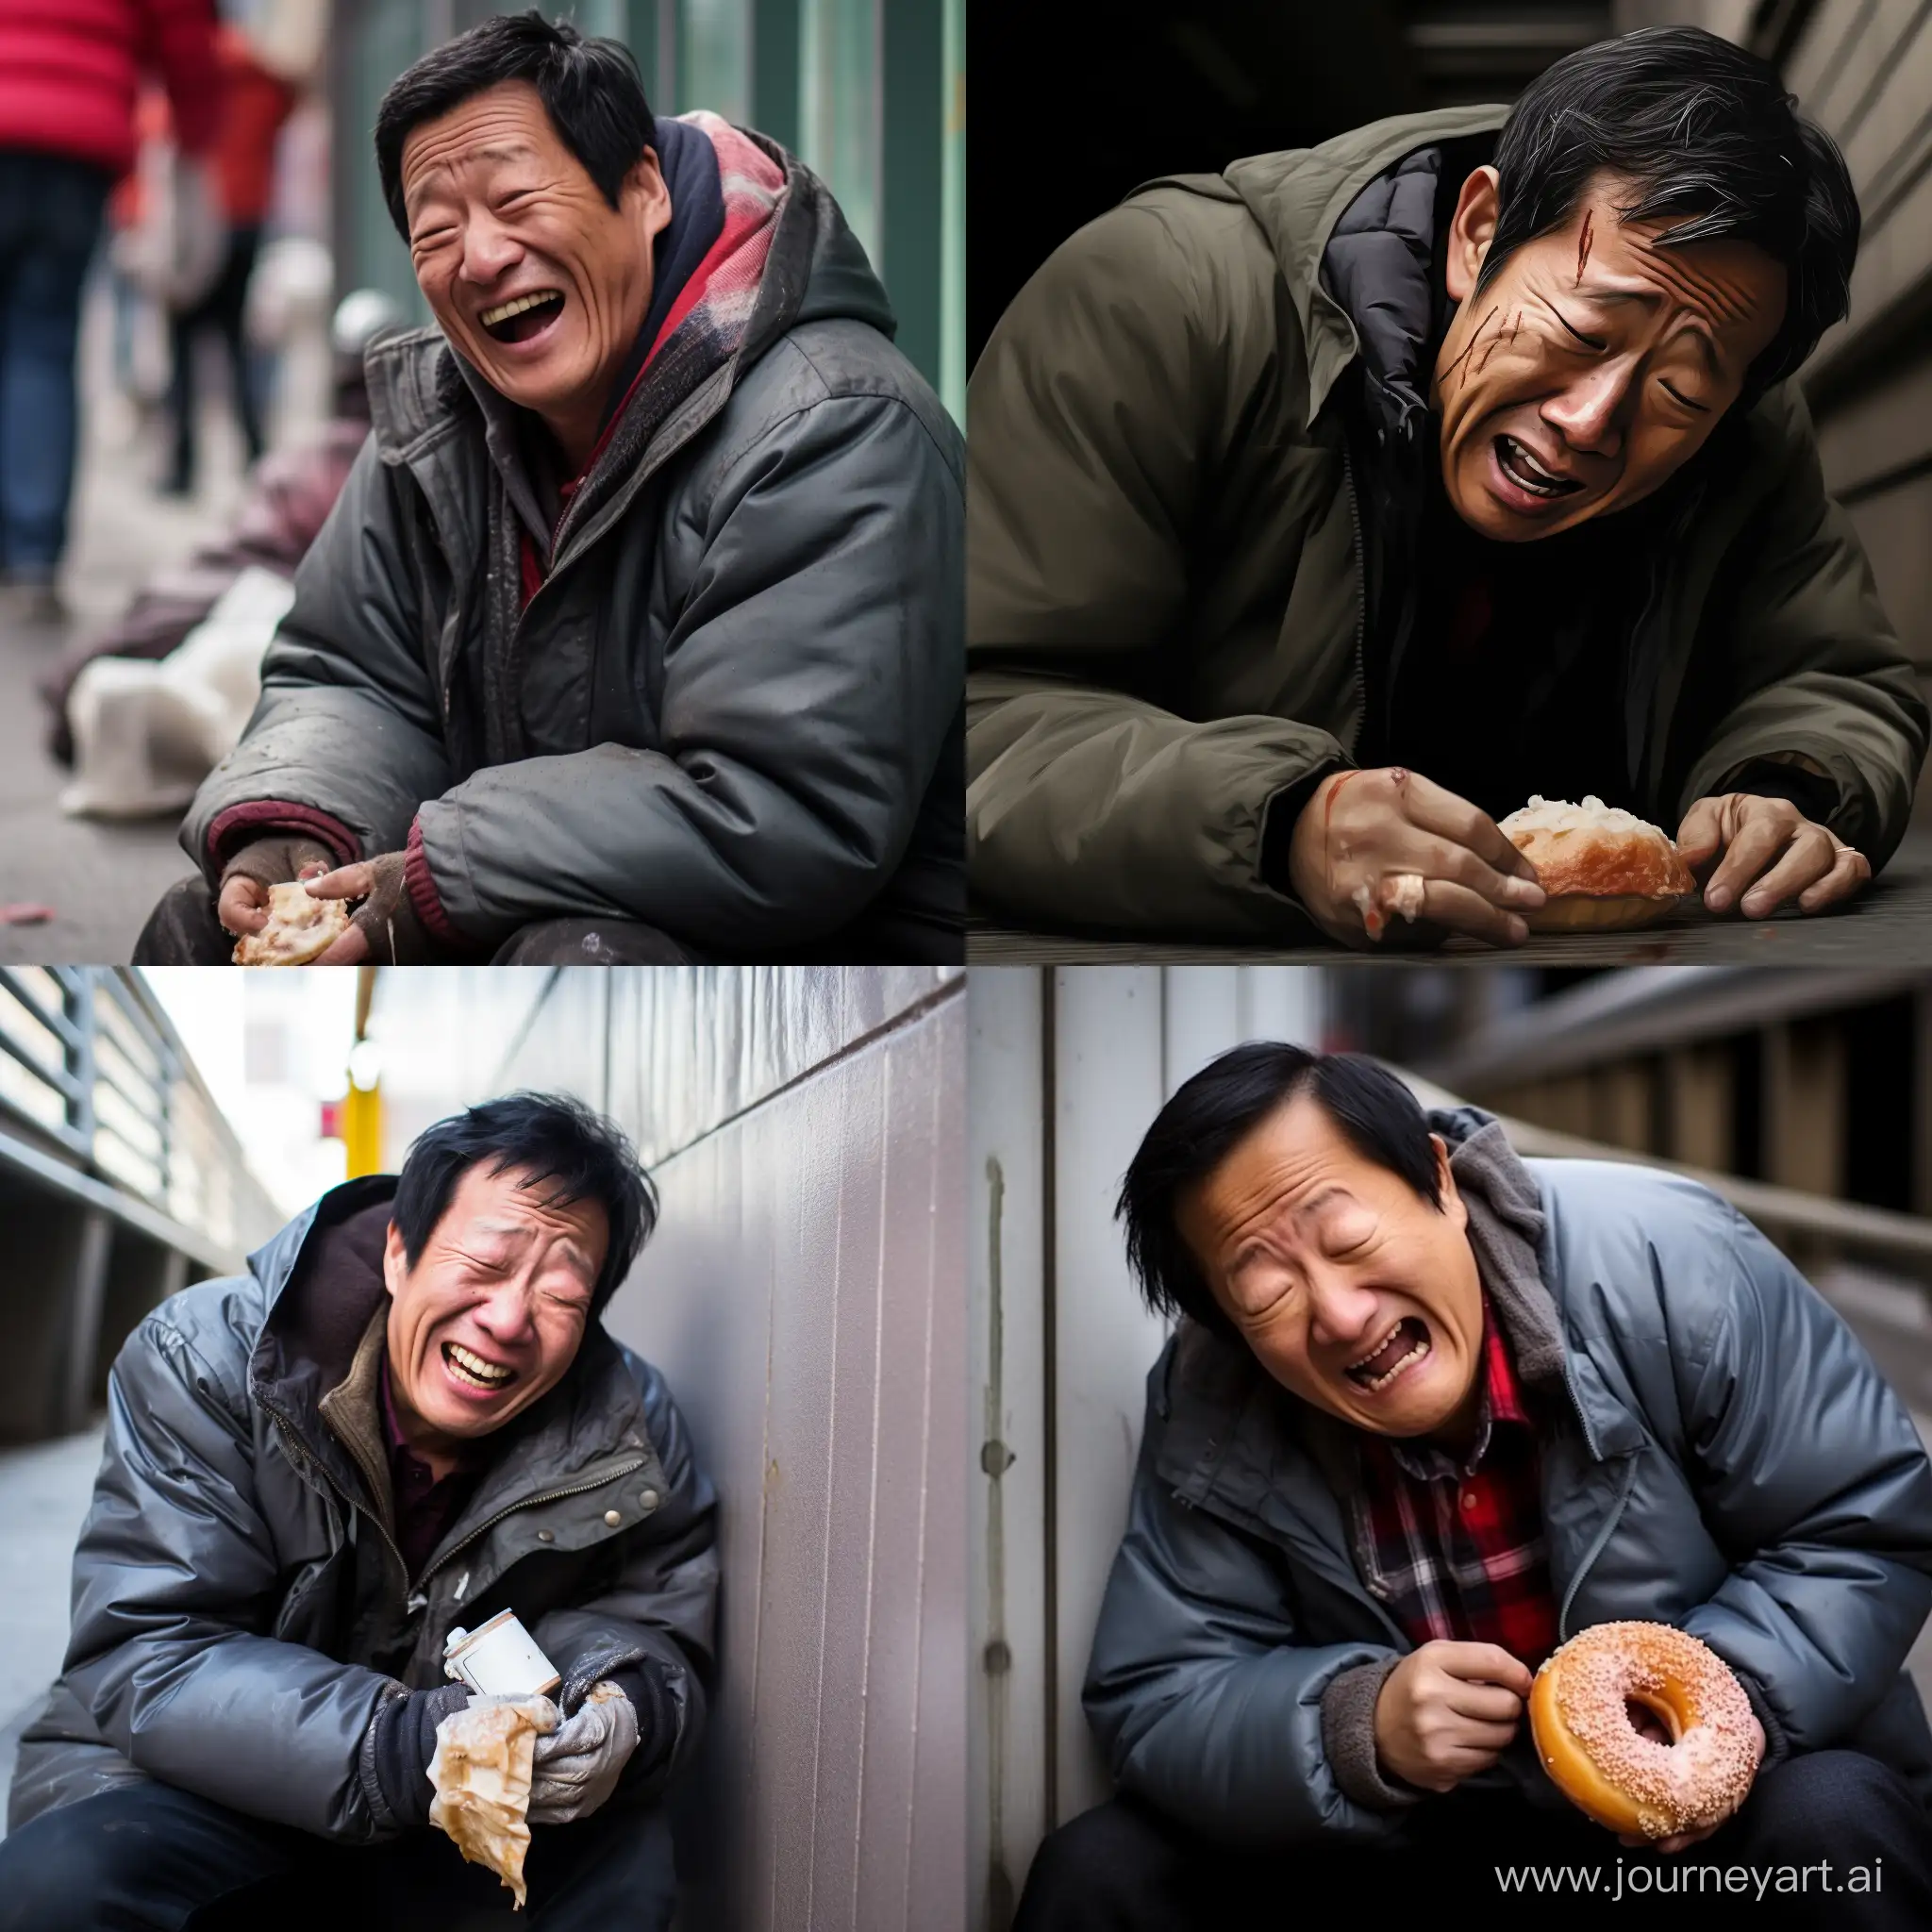 Elderly-Asian-Man-Finds-Solace-Beneath-Empire-State-Building-with-Tearful-Doughnut-Moment